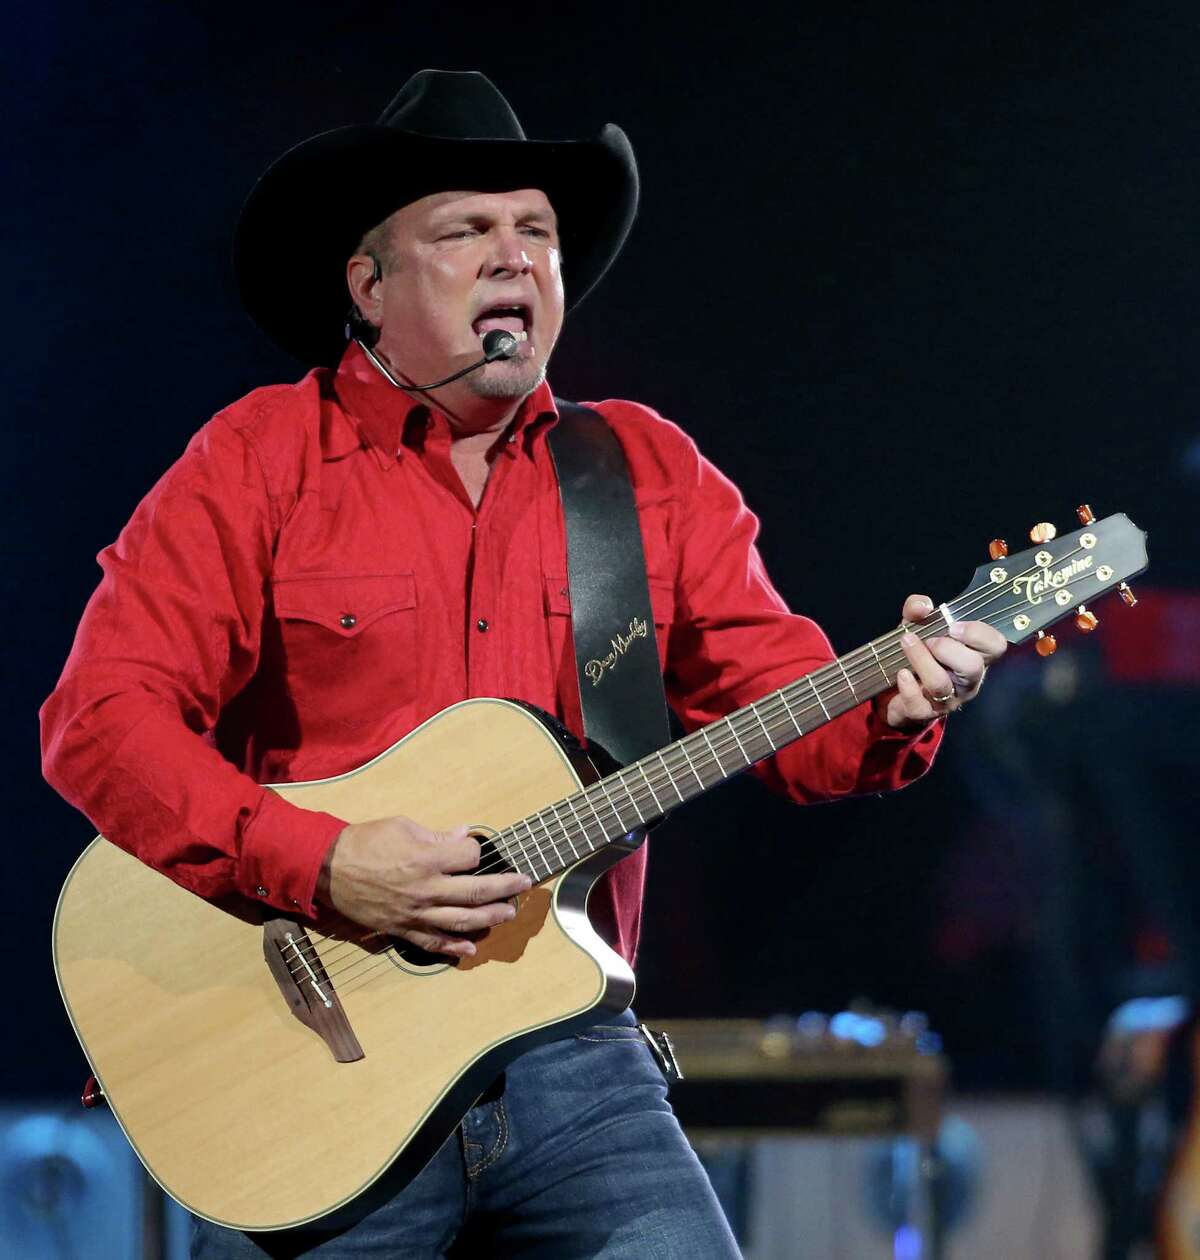 Garth Brooks opens and closes the Houston Livestock Show and Rodeo with concerts on Feb. 27 and March 18.